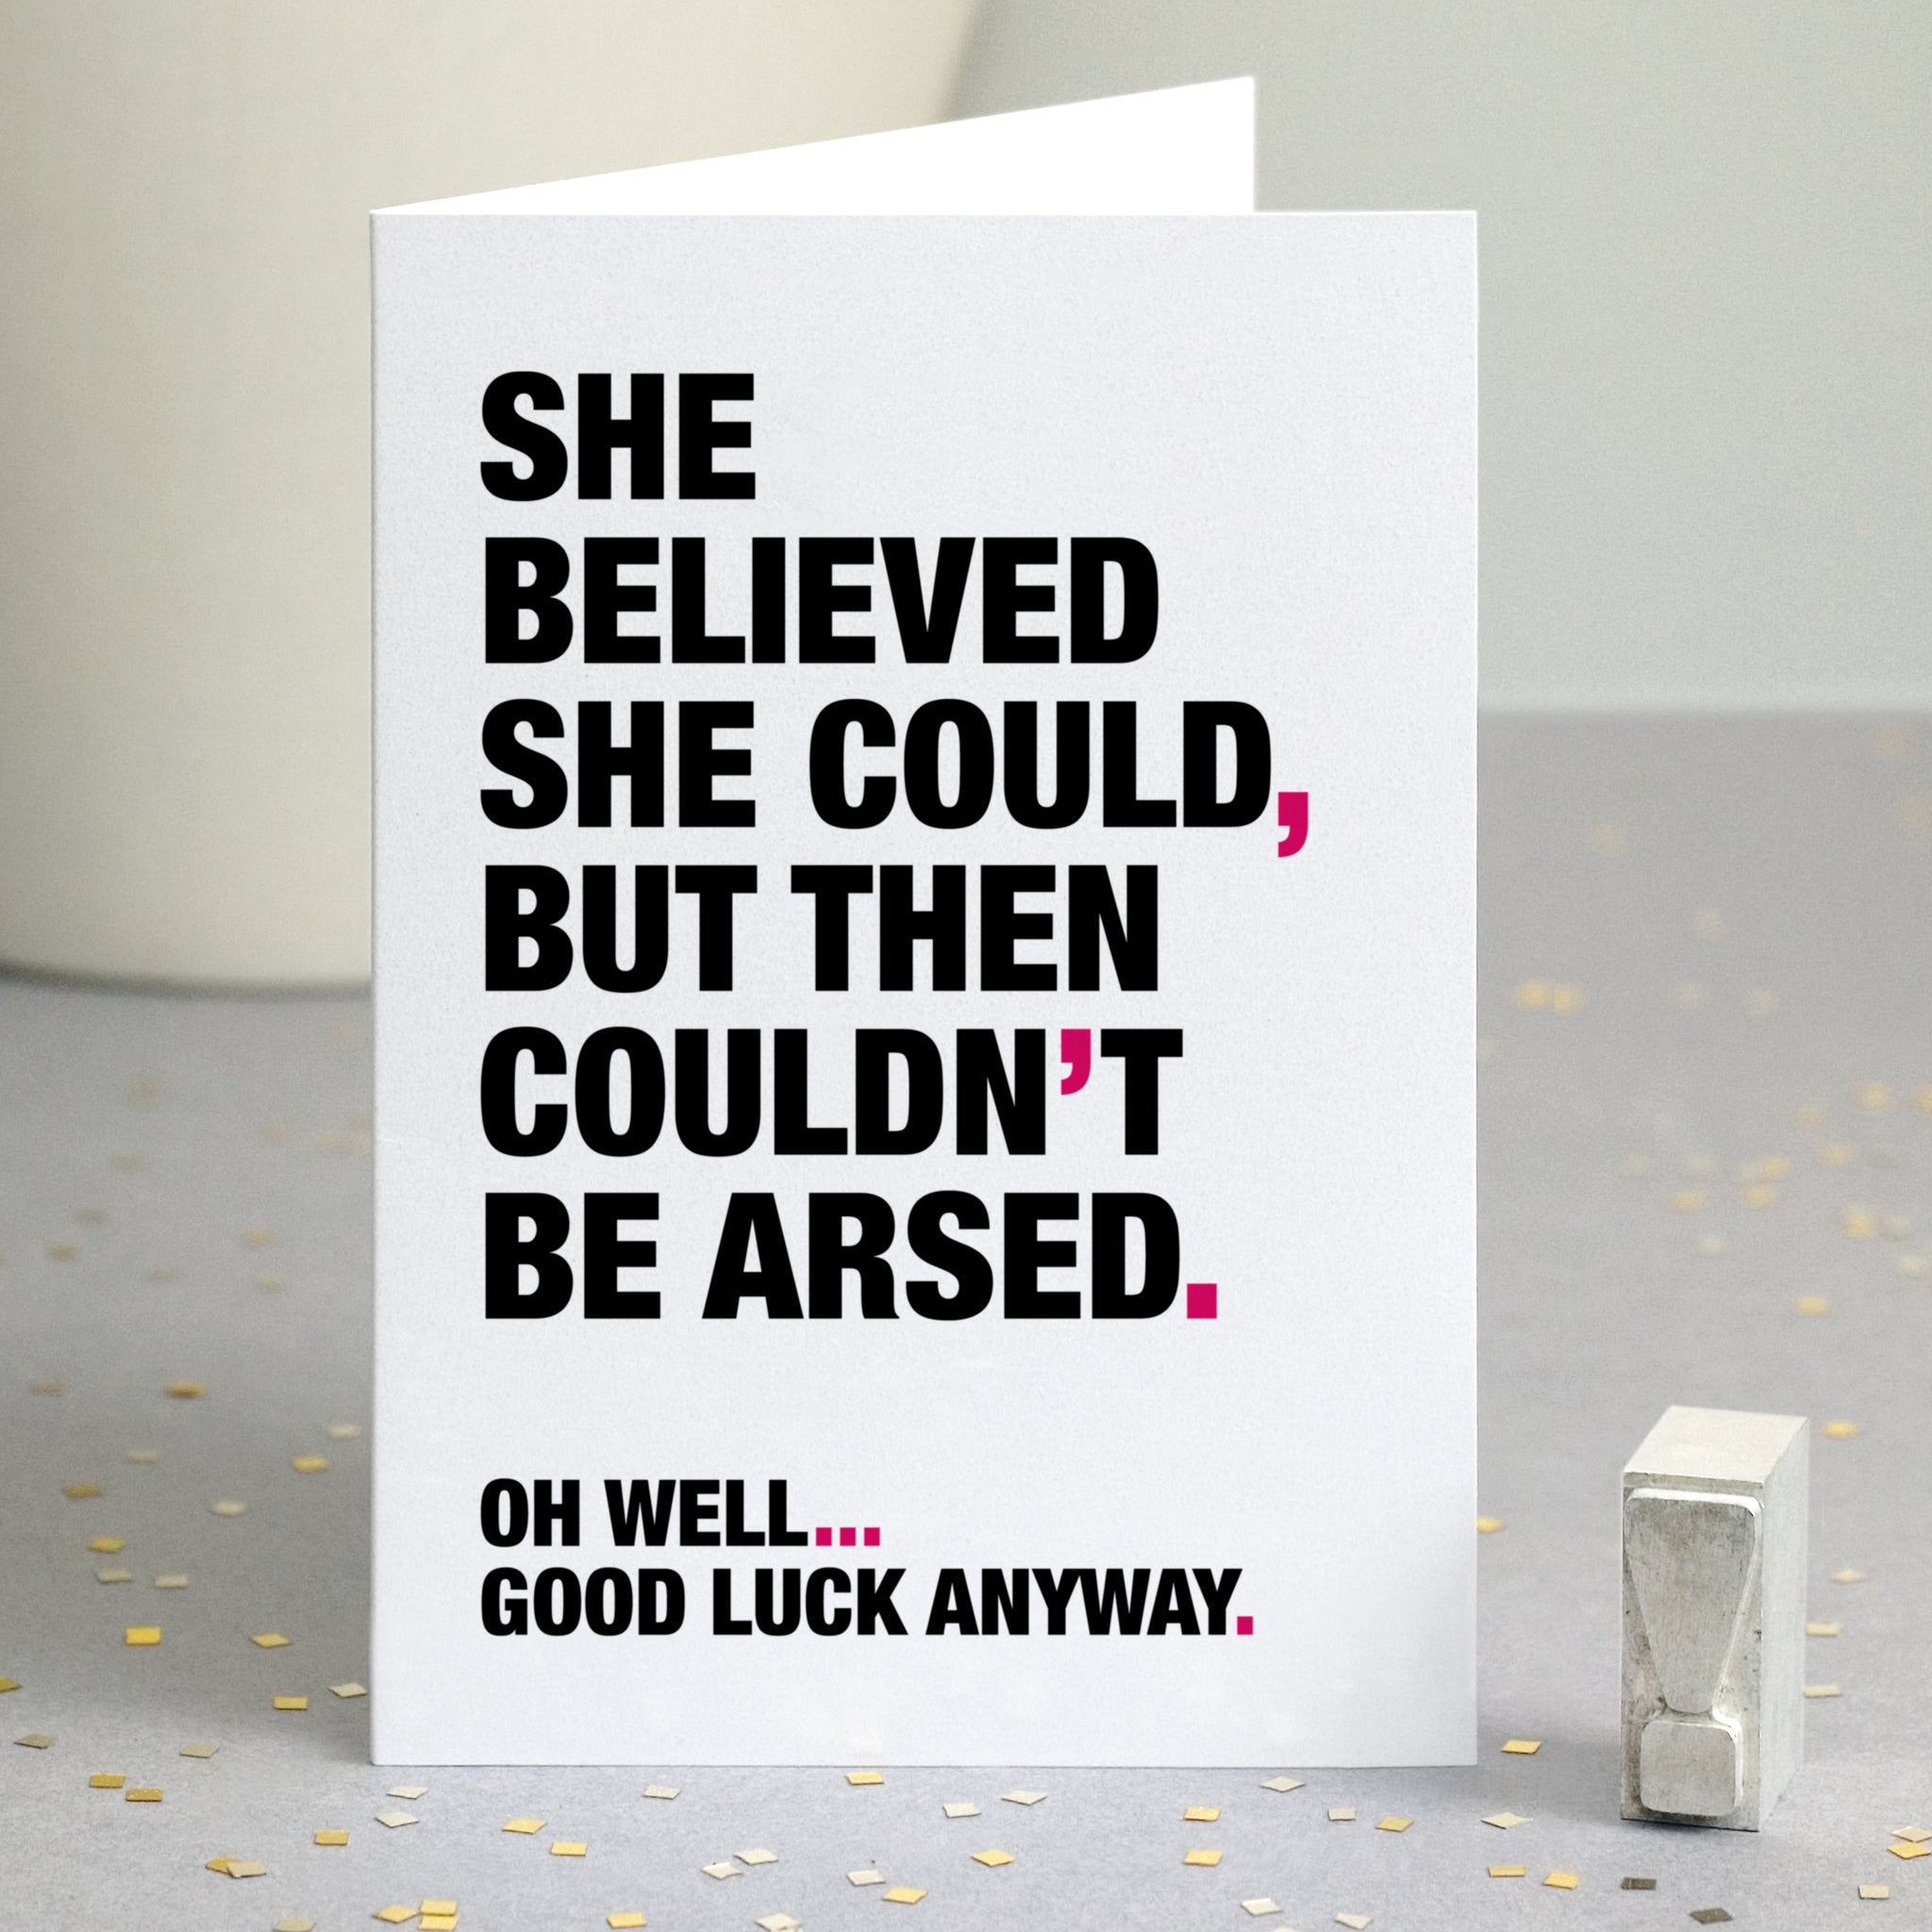 A funny card saying 'she believed she could, but then couldn't be arsed, oh well... good luck anyway'.